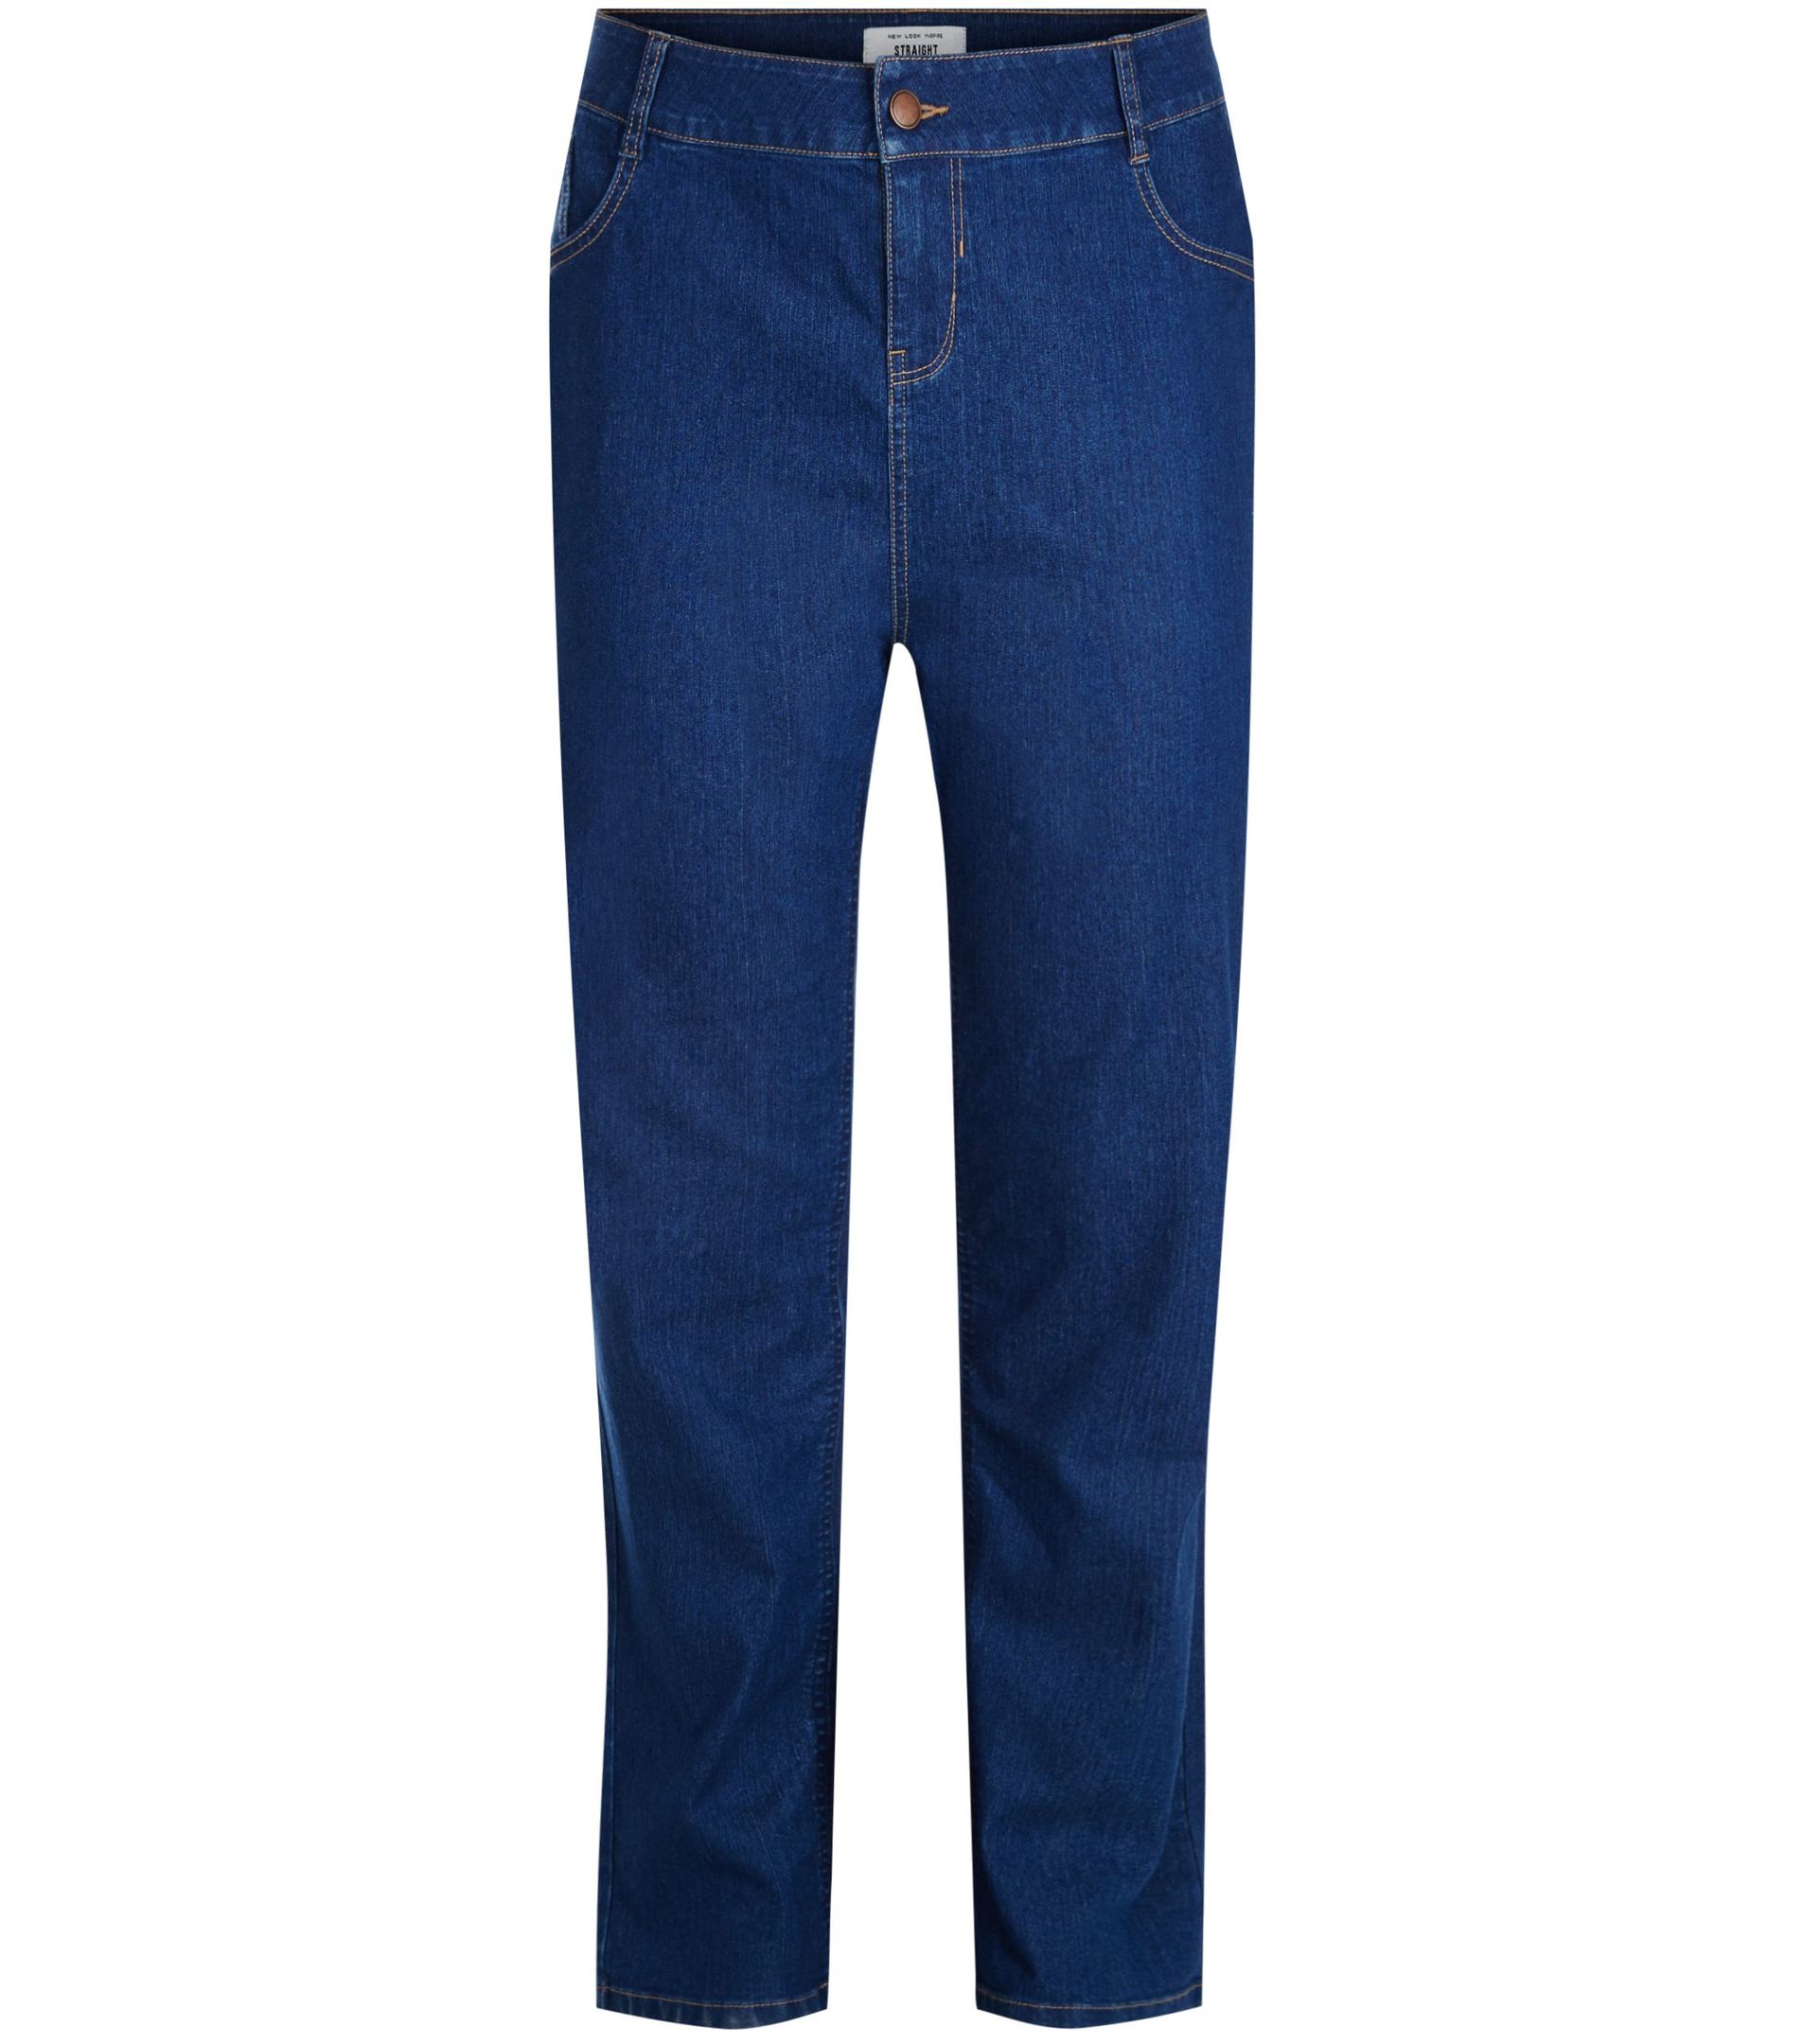 Jeans, £14.99, New Look